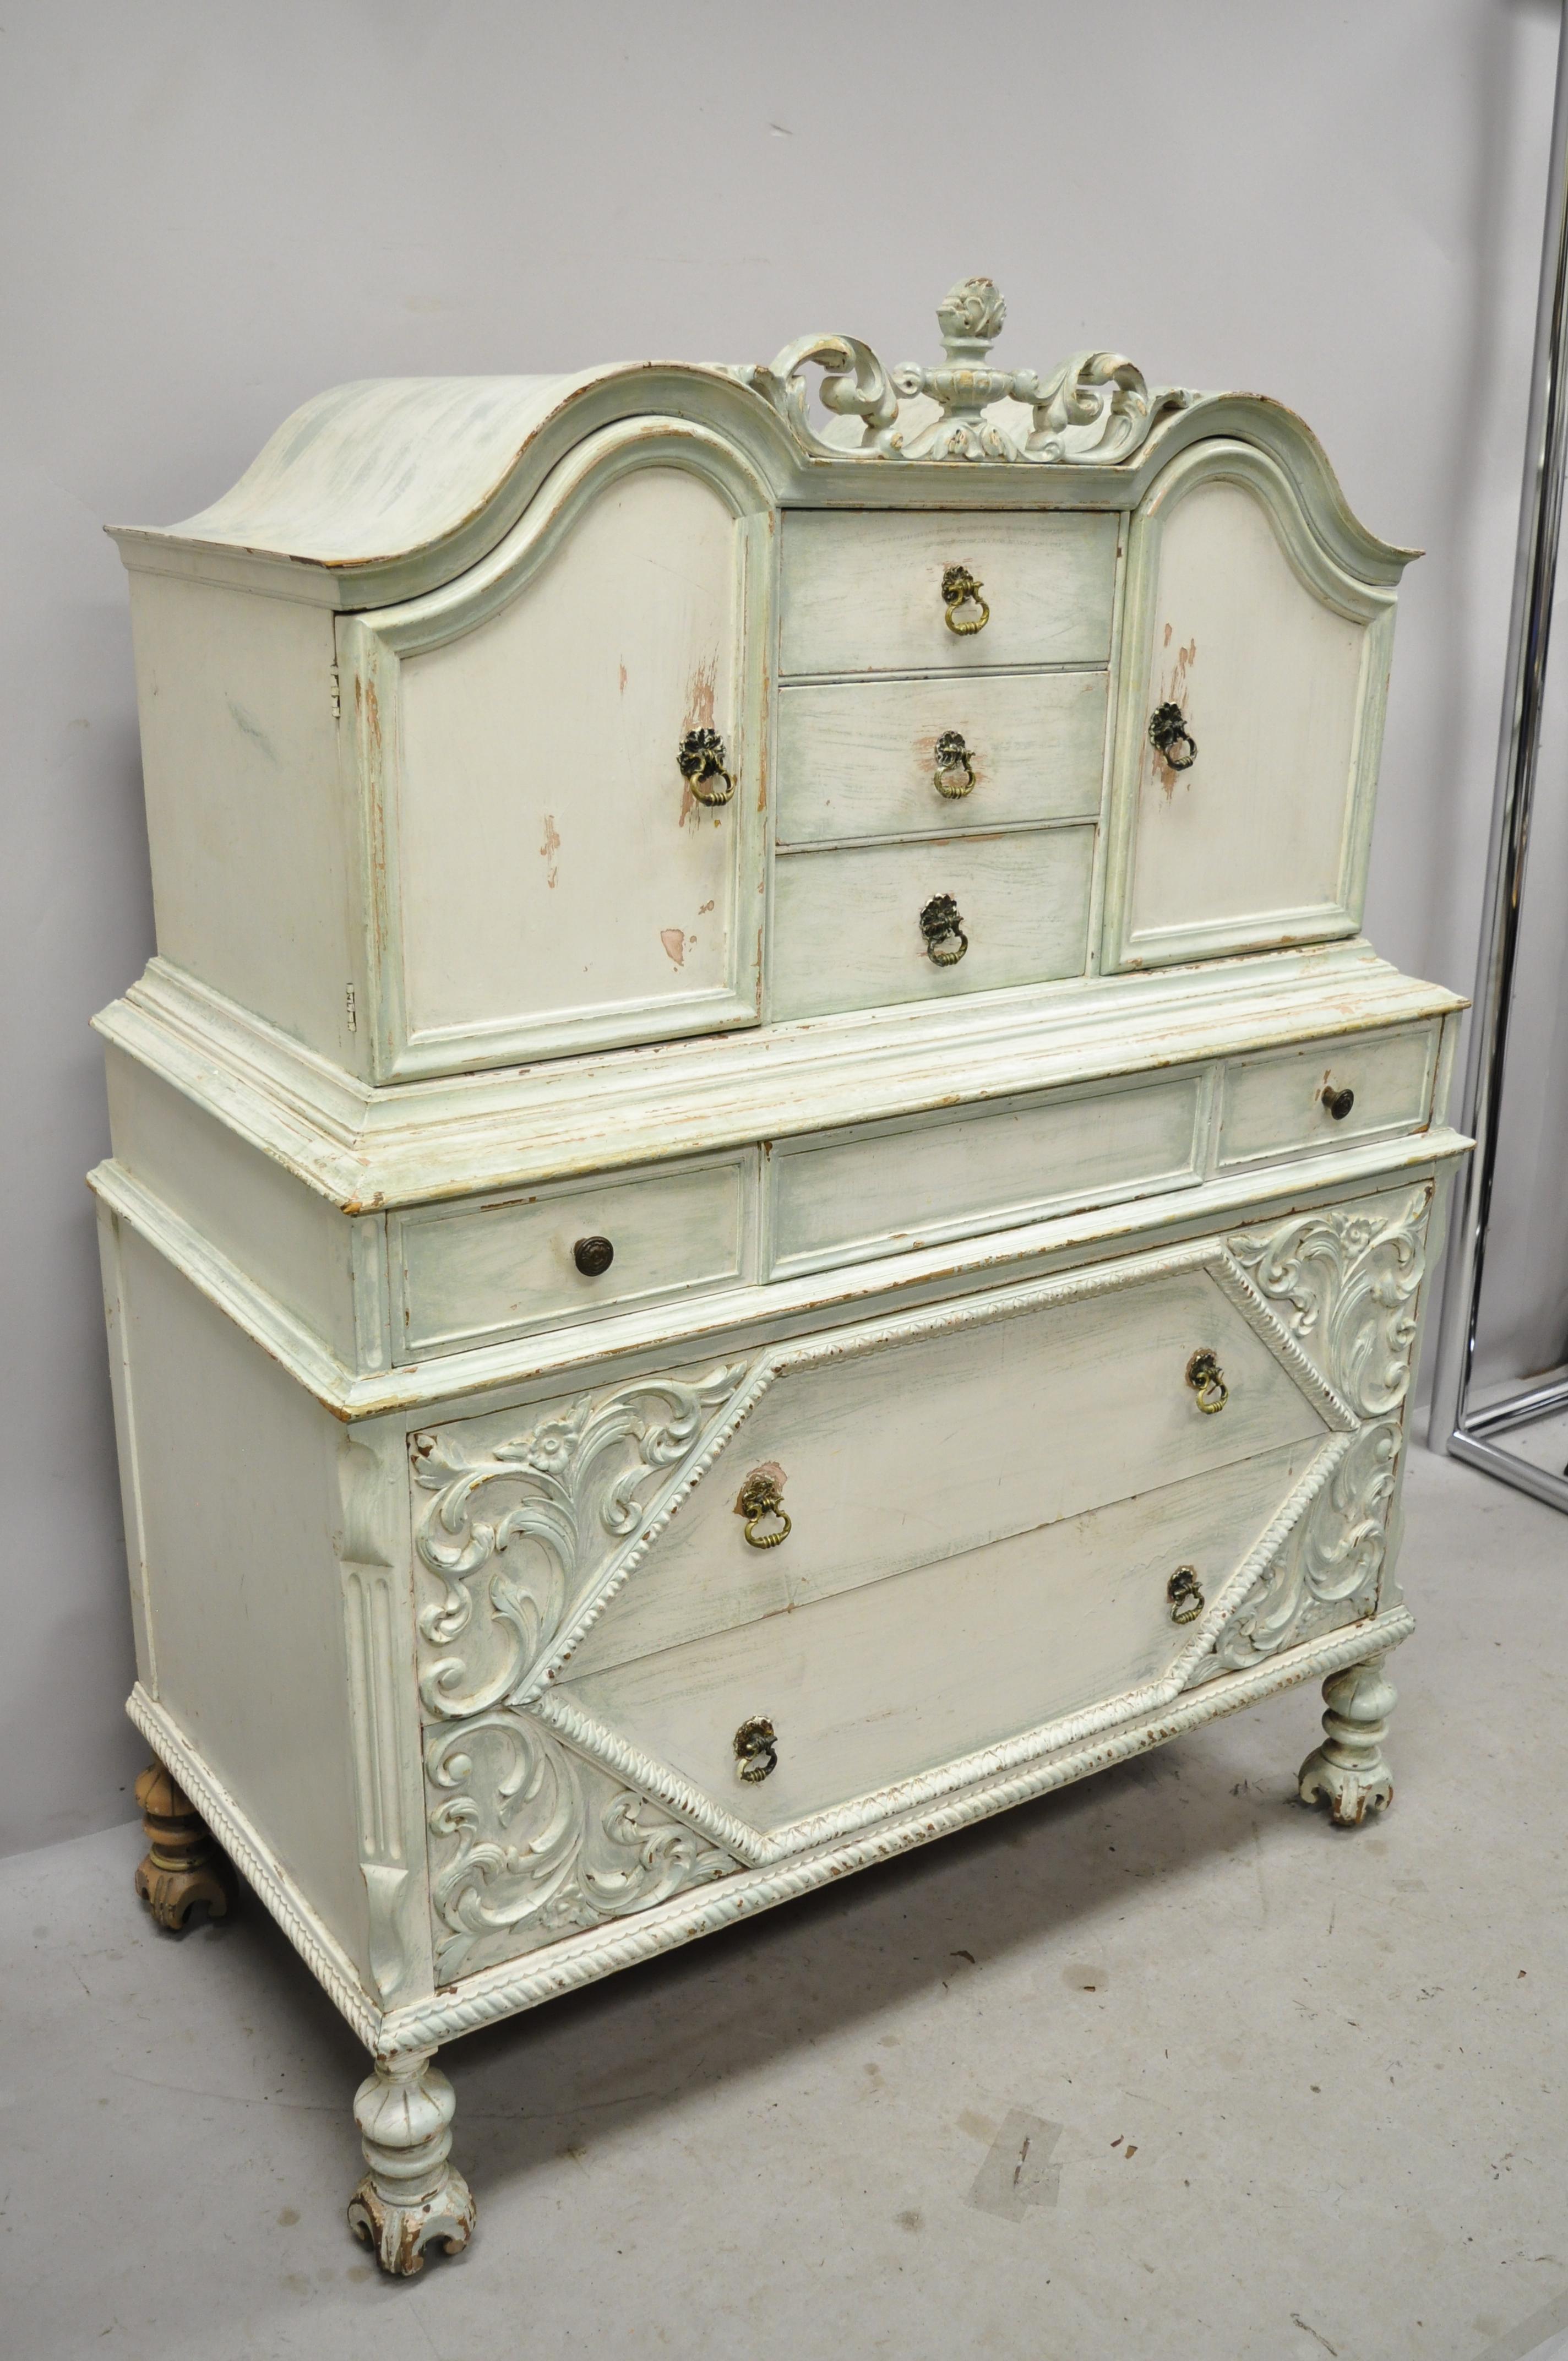 Antique depression Renaissance bonnet top blue white distress painted dresser chest armoire. Item features rolling casters, urn carved pediment, blue/white distressed finish, 2 swing doors, 6 dovetailed drawers, solid brass hardware, very nice